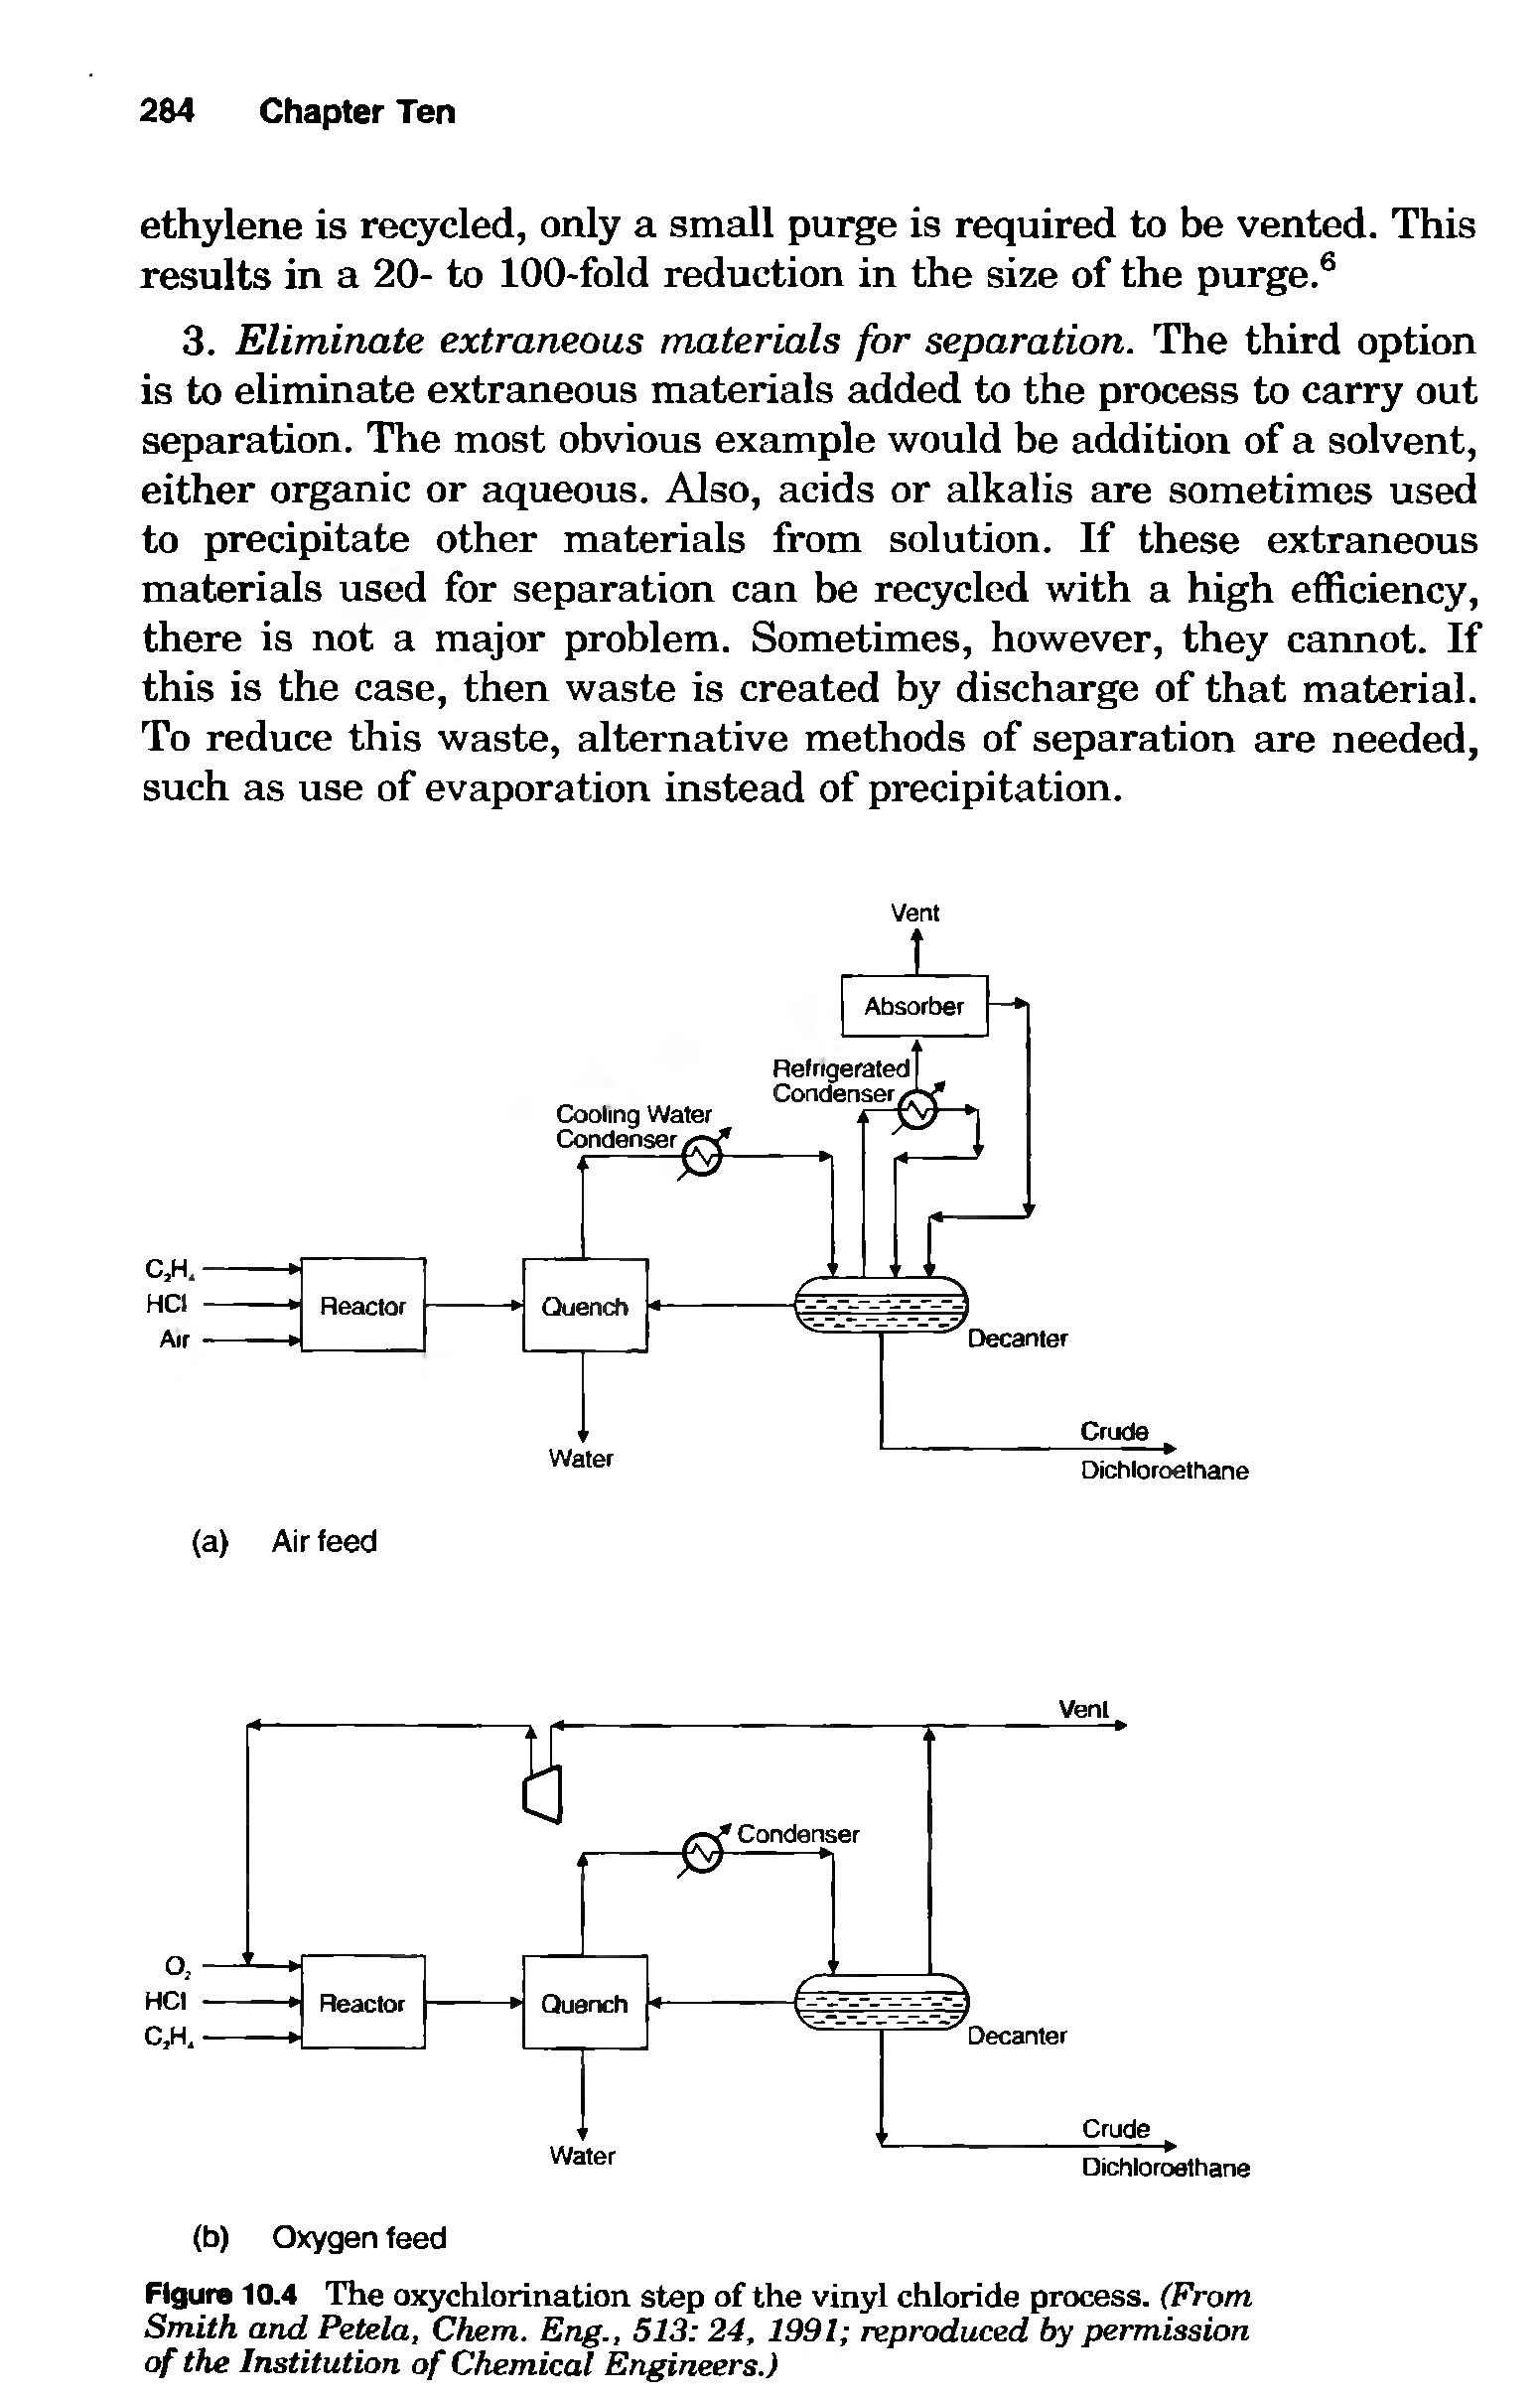 Figure 10.4 The oxychlorination step of the vinyl chloride process. (From Smith and Petela, Chem. Eng., 513 24, 1991 reproduced by permission of the Institution of Chemical Engineers.)...